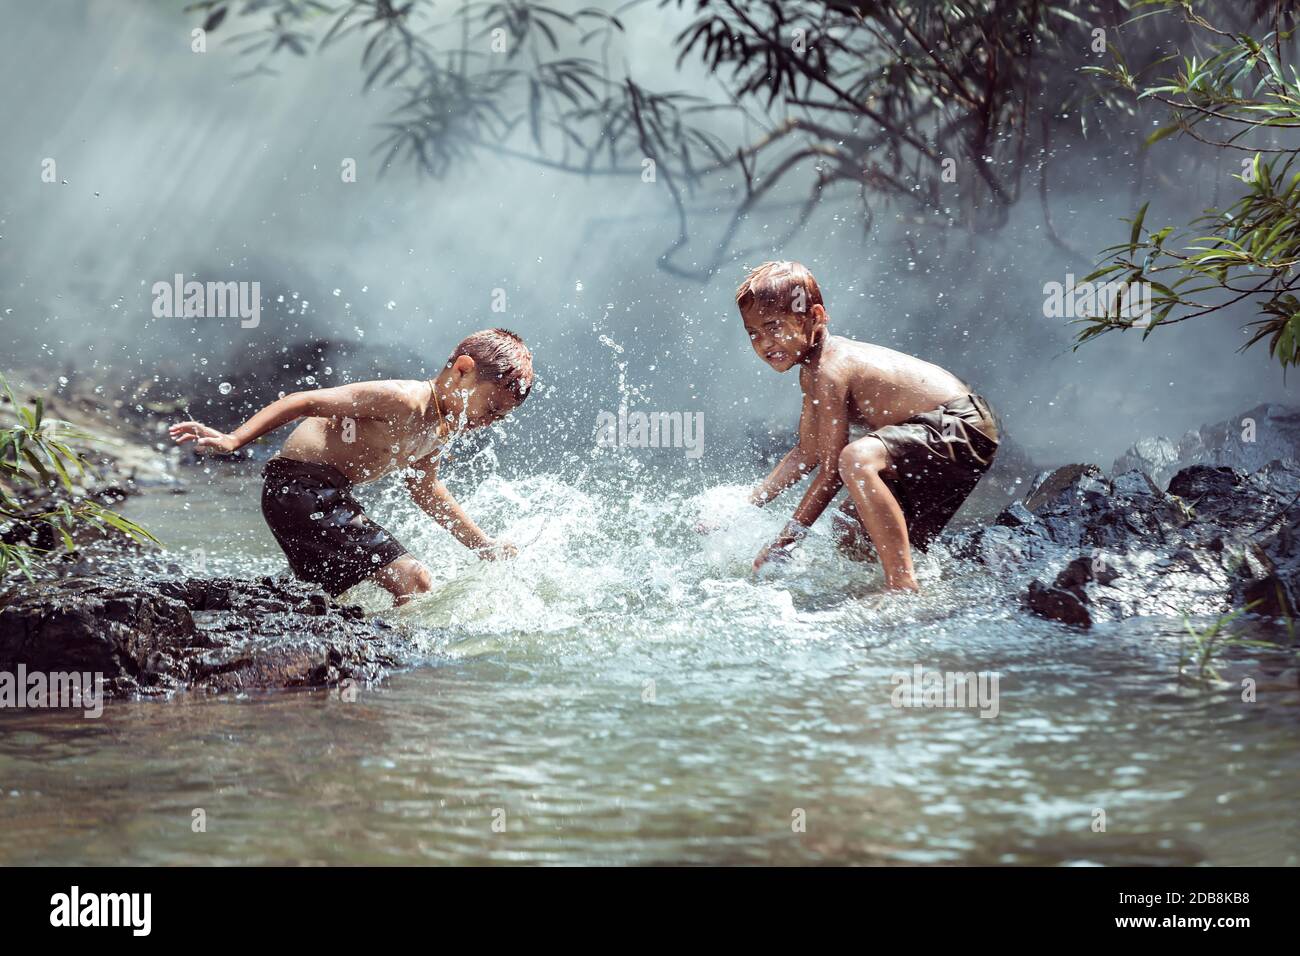 Two boys washing in a river, Thailand Stock Photo